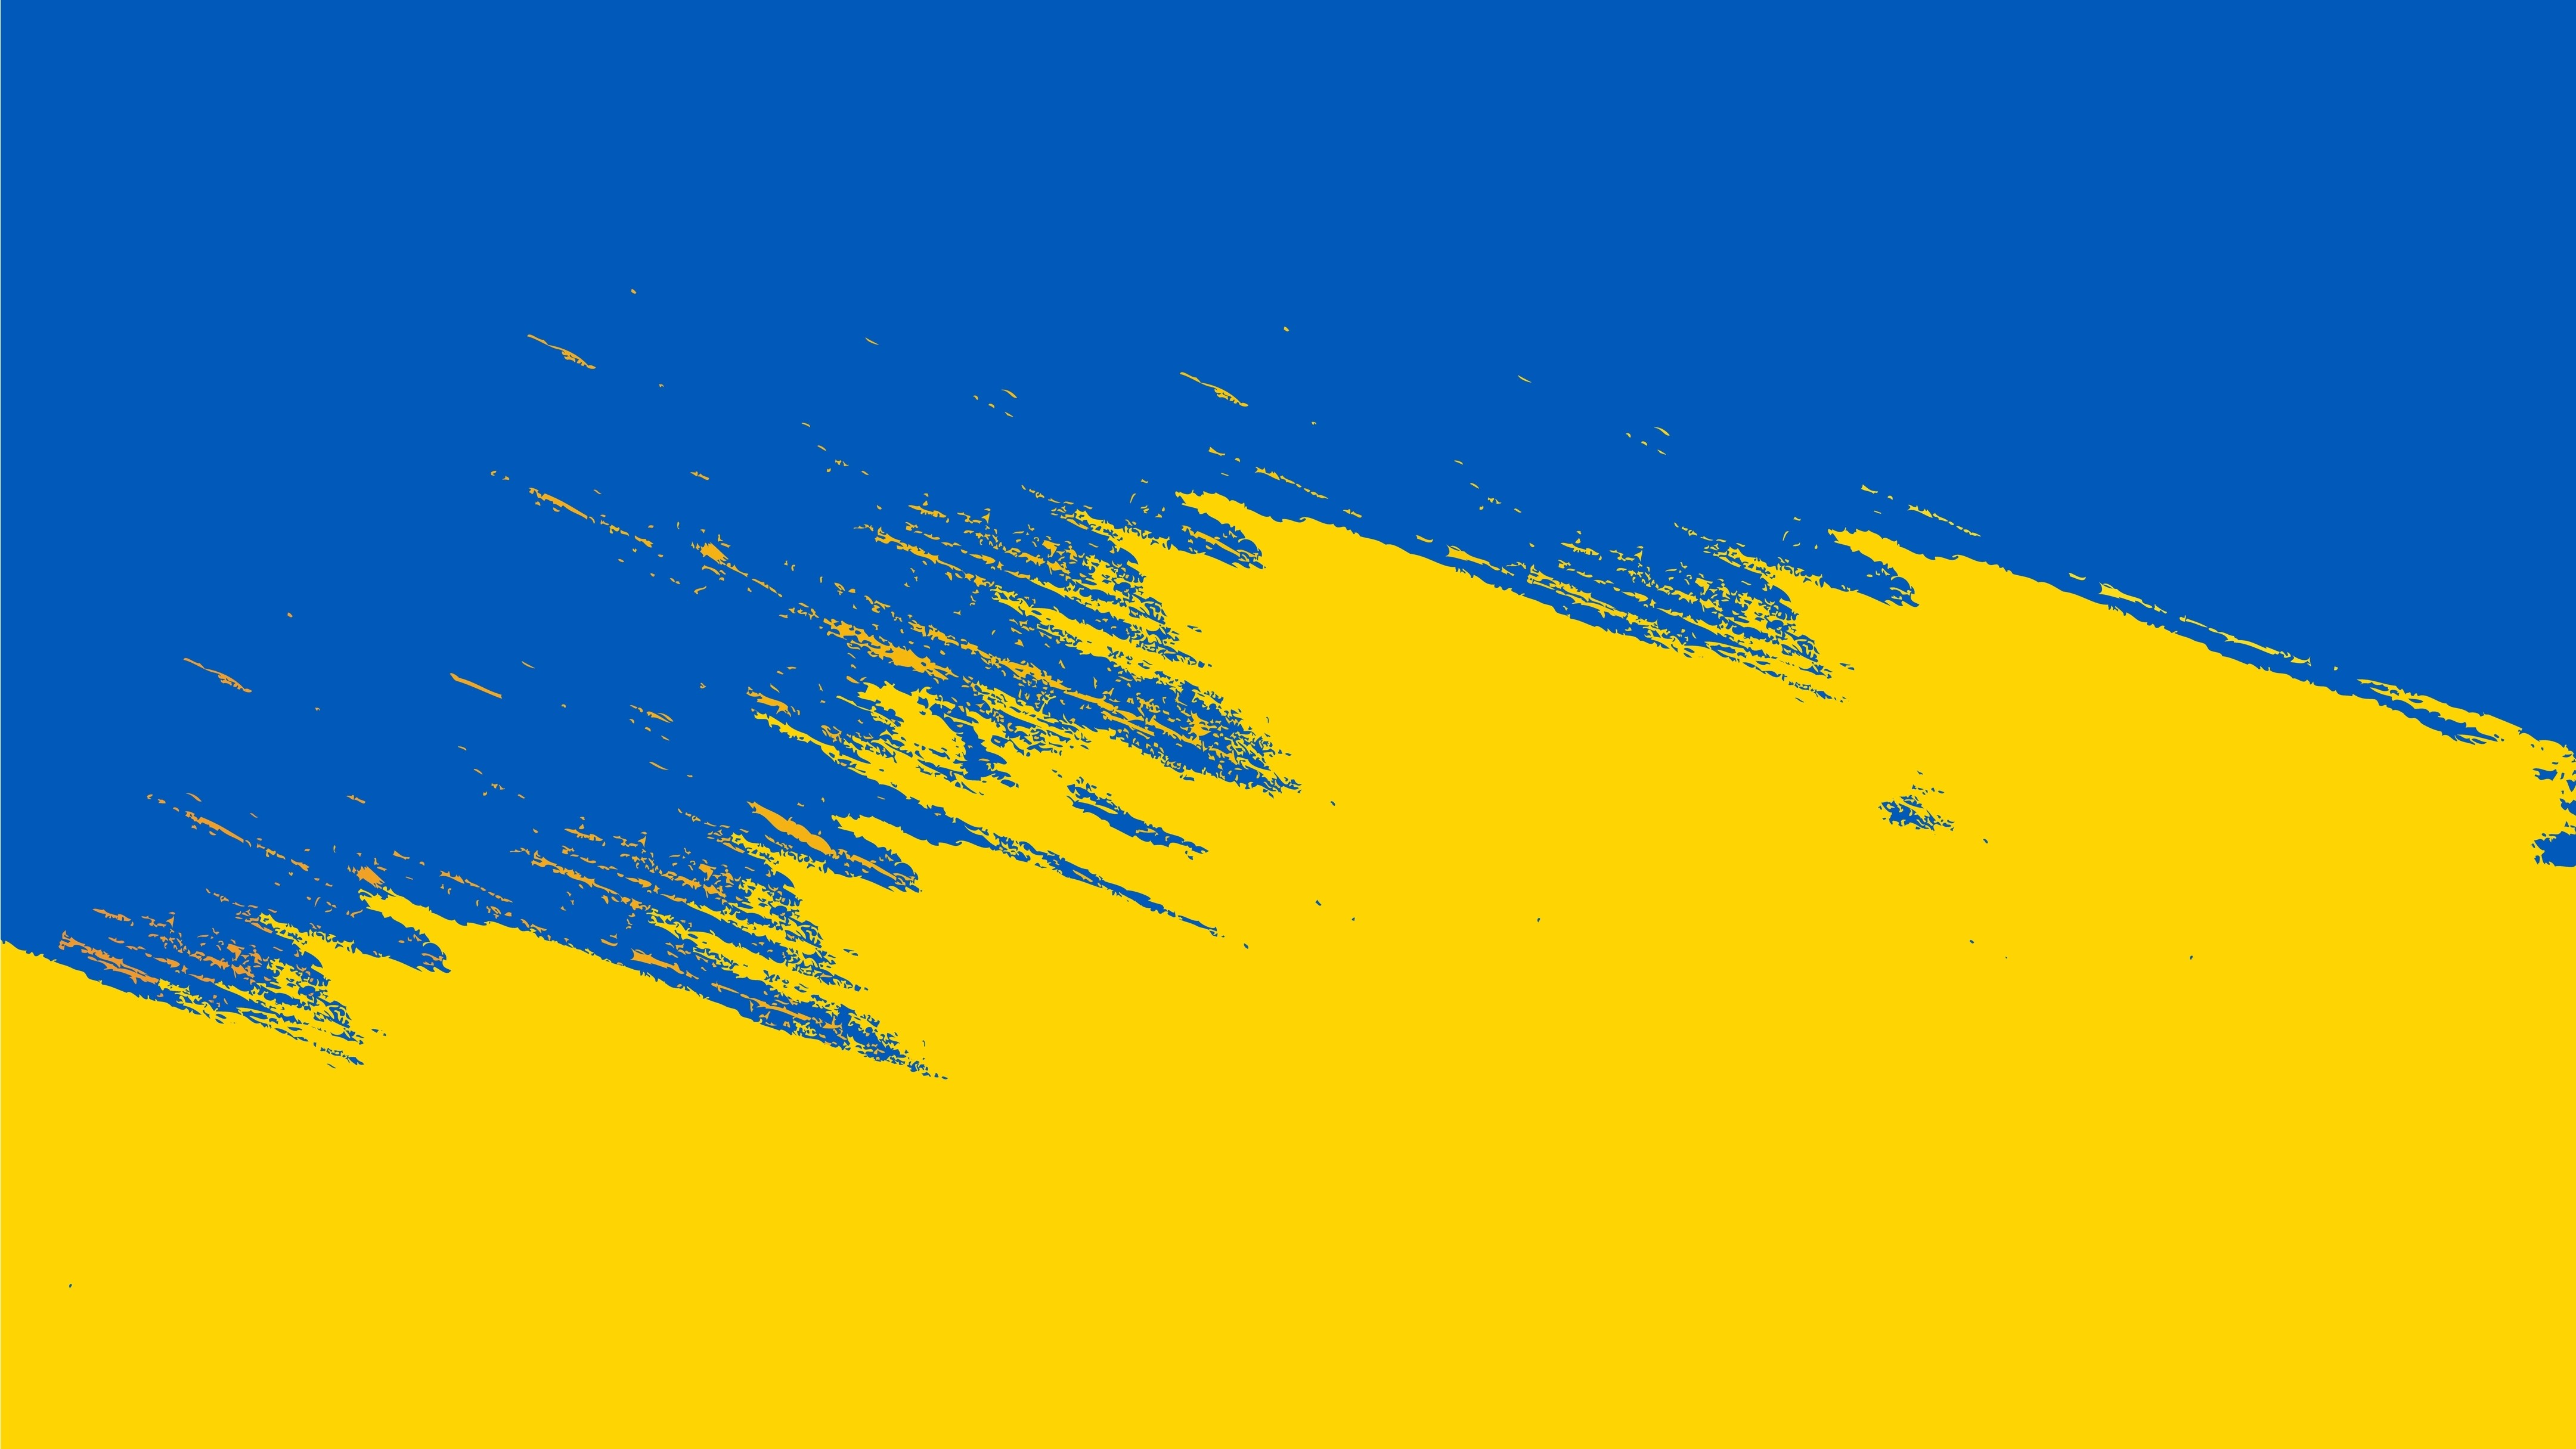 The Educational Research Institute stands with Ukraine